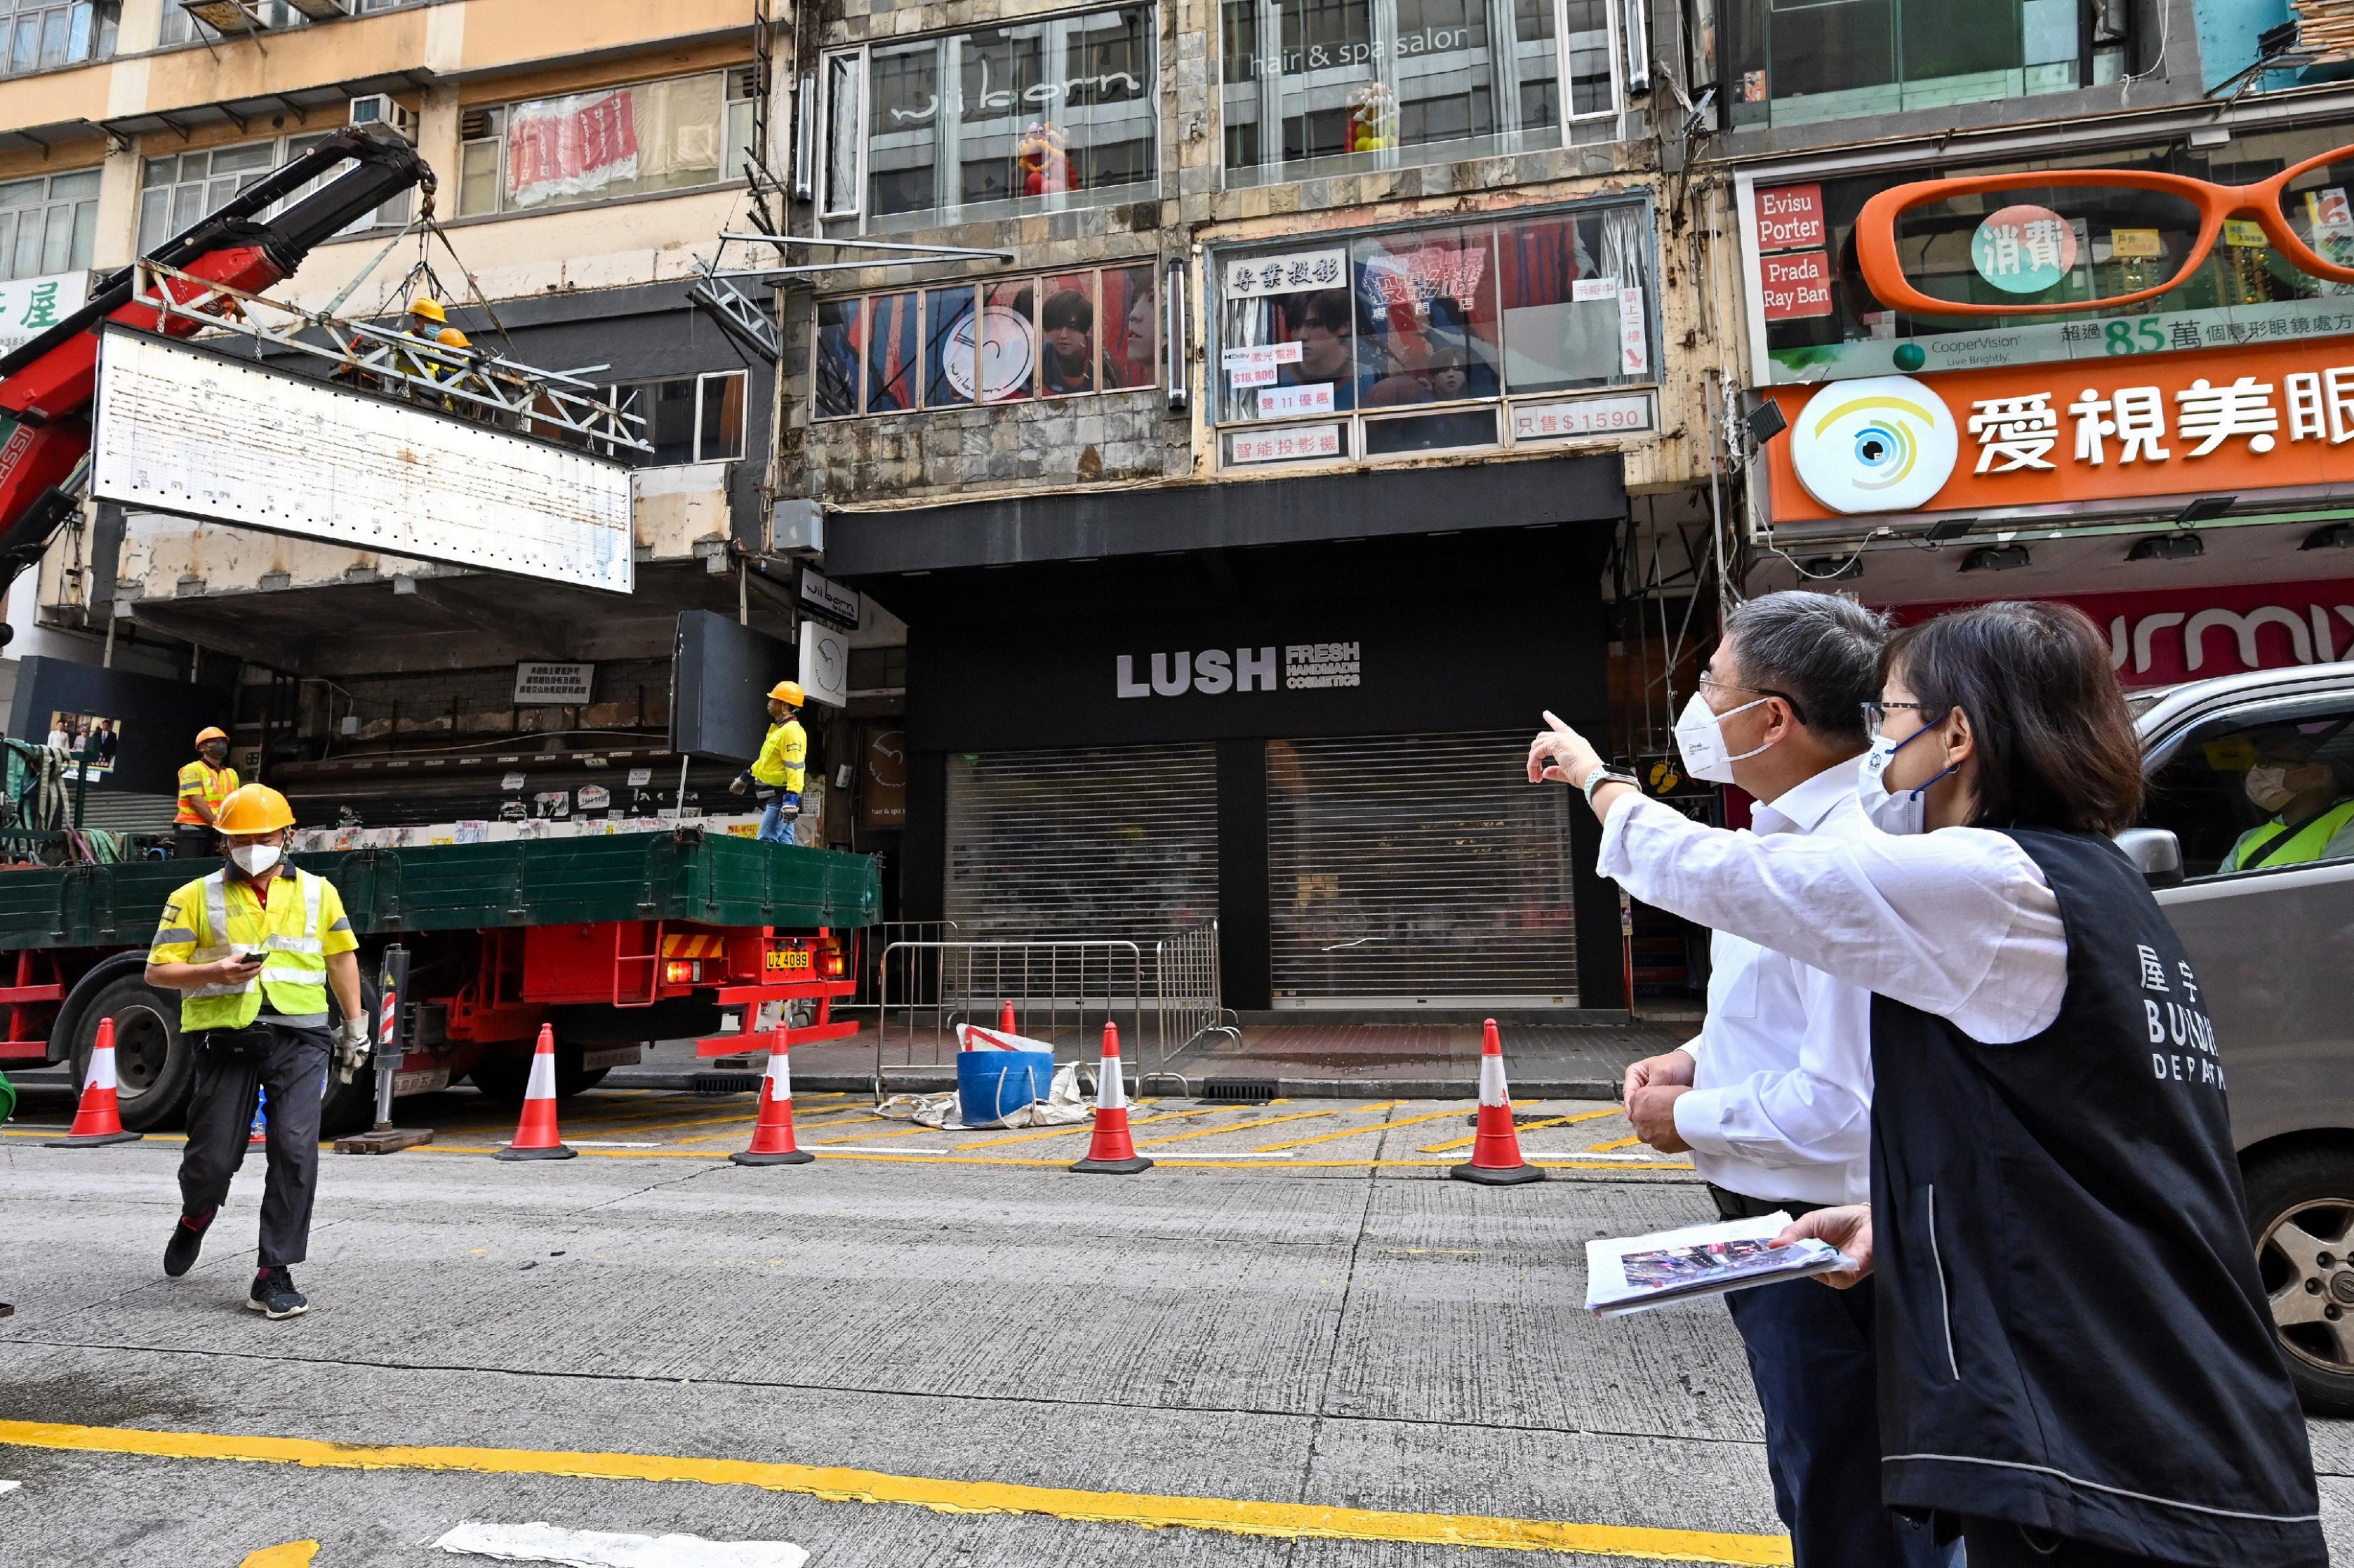 The Deputy Chief Secretary for Administration, Mr Cheuk Wing-hing (left), is given an on-site briefing by the Director of Buildings, Ms Clarice Yu (right), at Sai Yeung Choi Street South in Mong Kok this morning (November 15) on the work of the Buildings Department in removing dangerous and abandoned signboards.